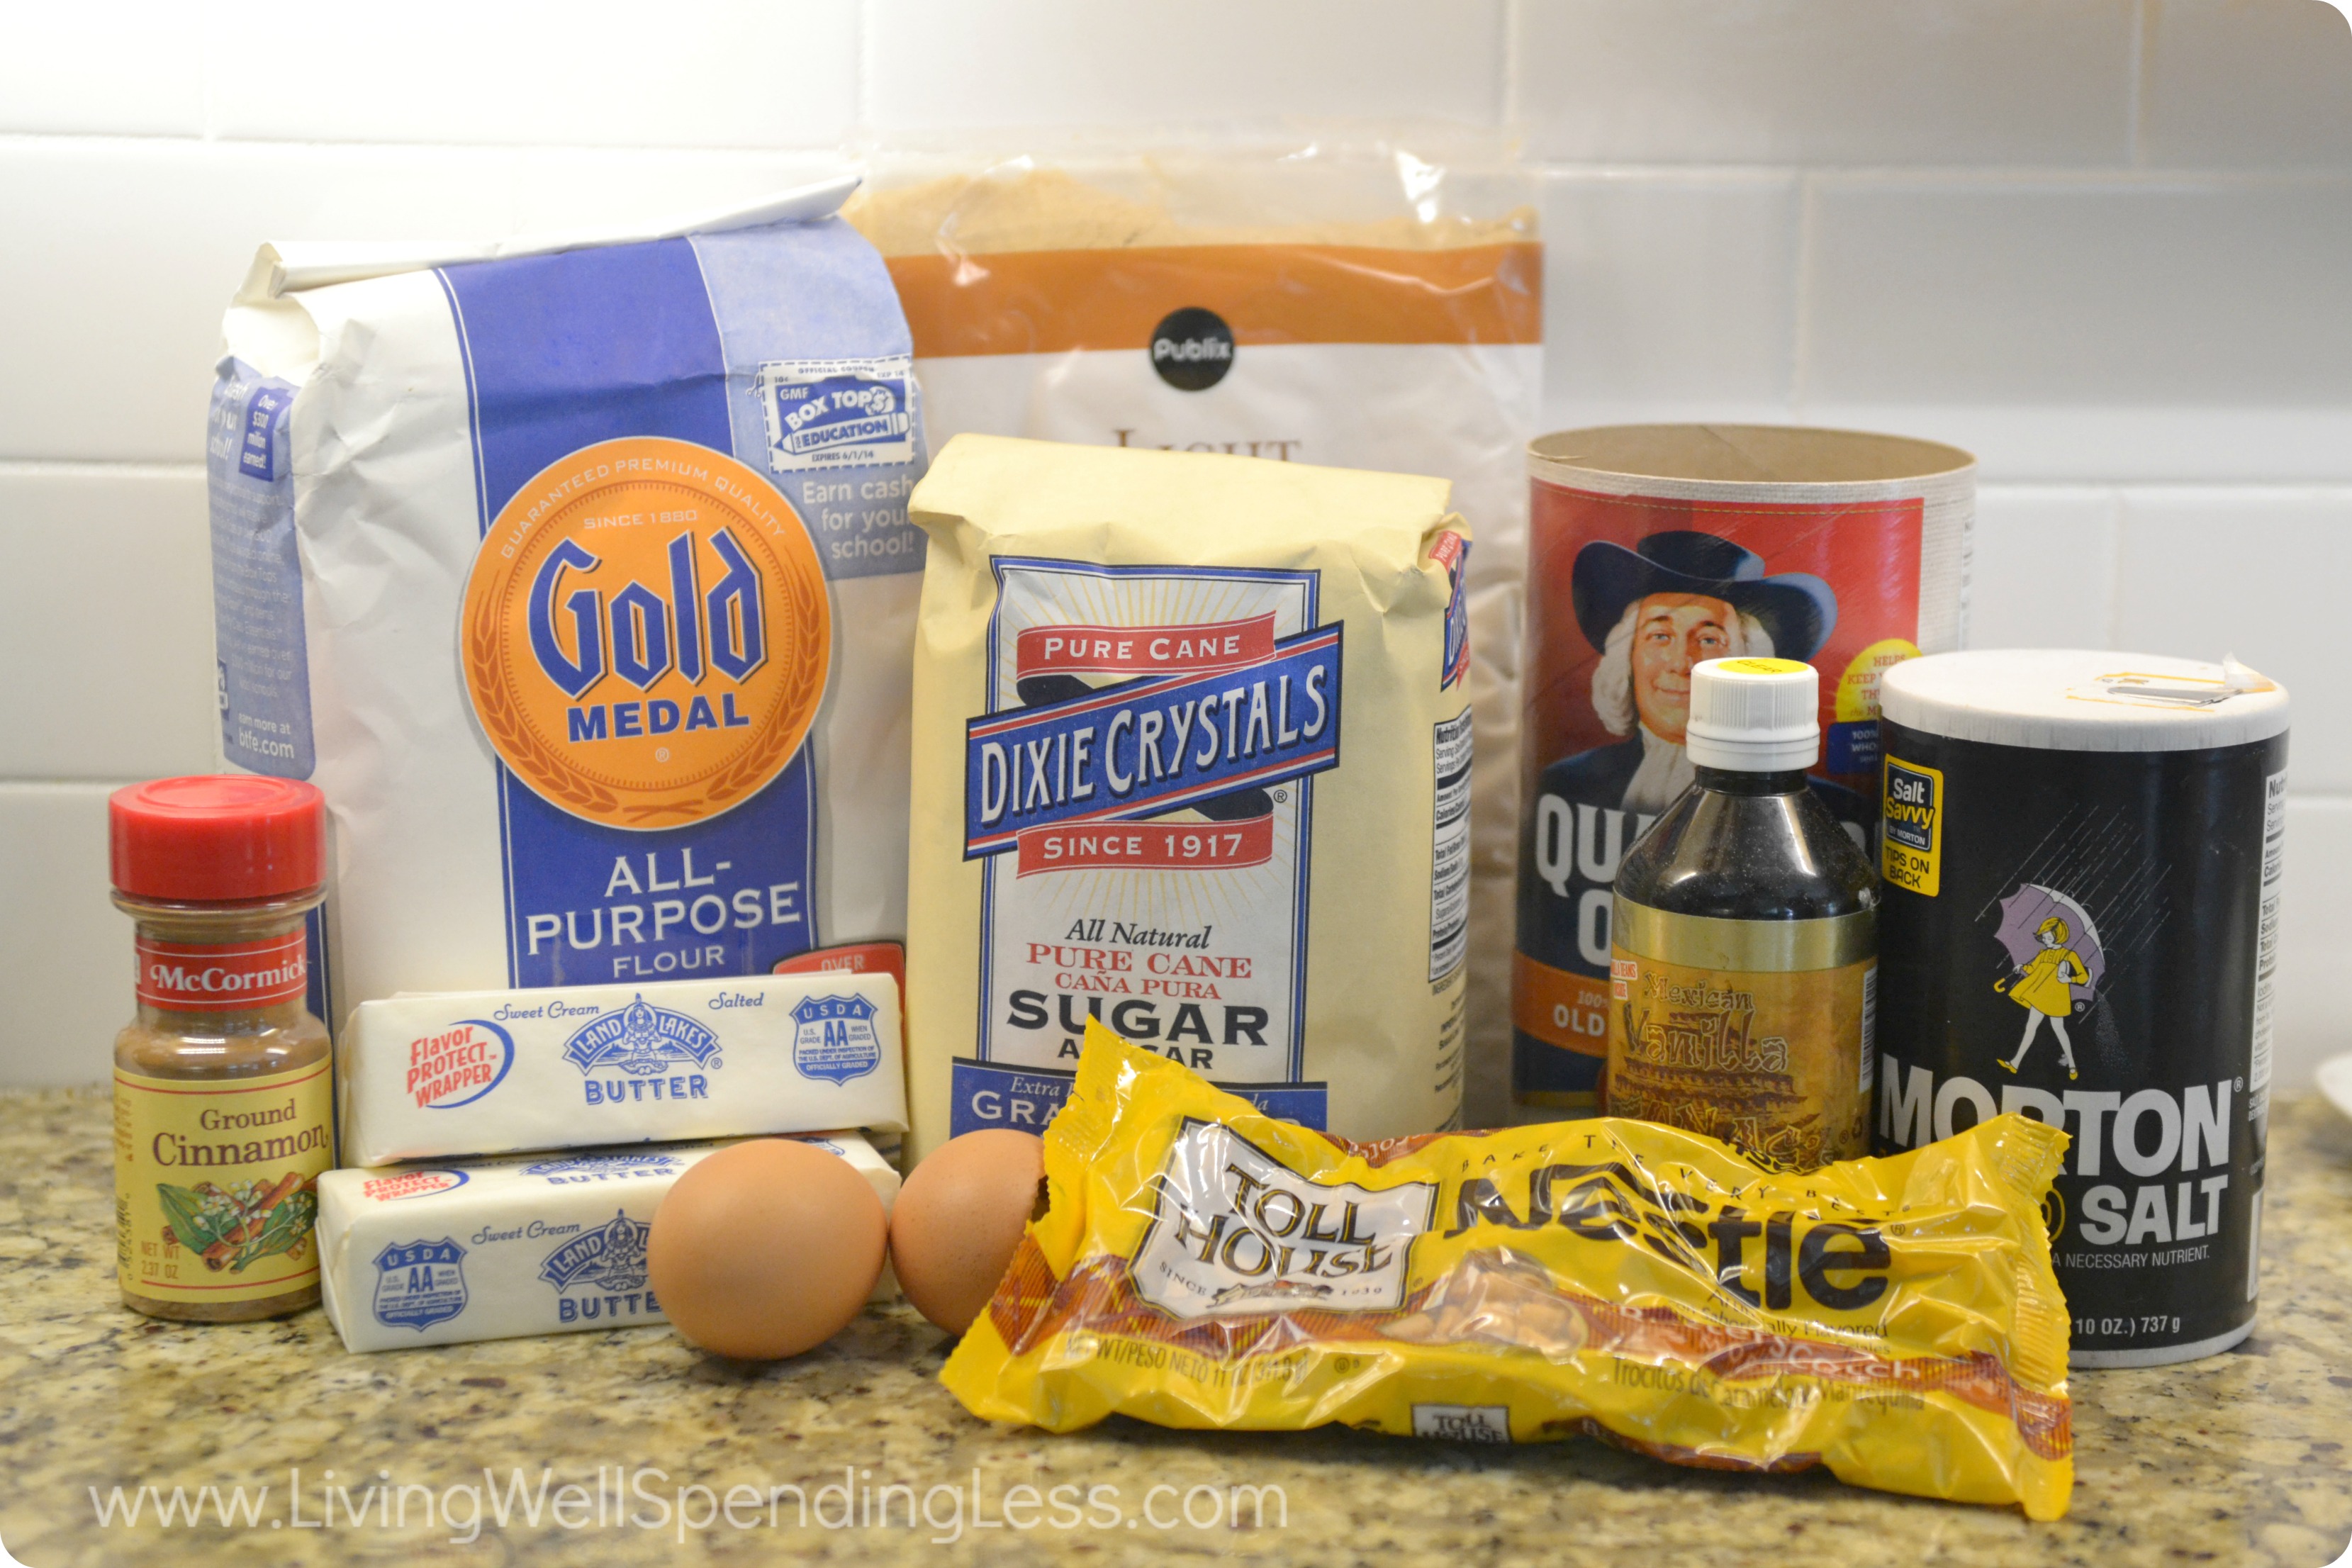 All the ingredients you need to make amazing butterscotch oatmeal cookies: flour, butter, cinnamon, eggs, sugar, oats, butterscotch chips and salt. 